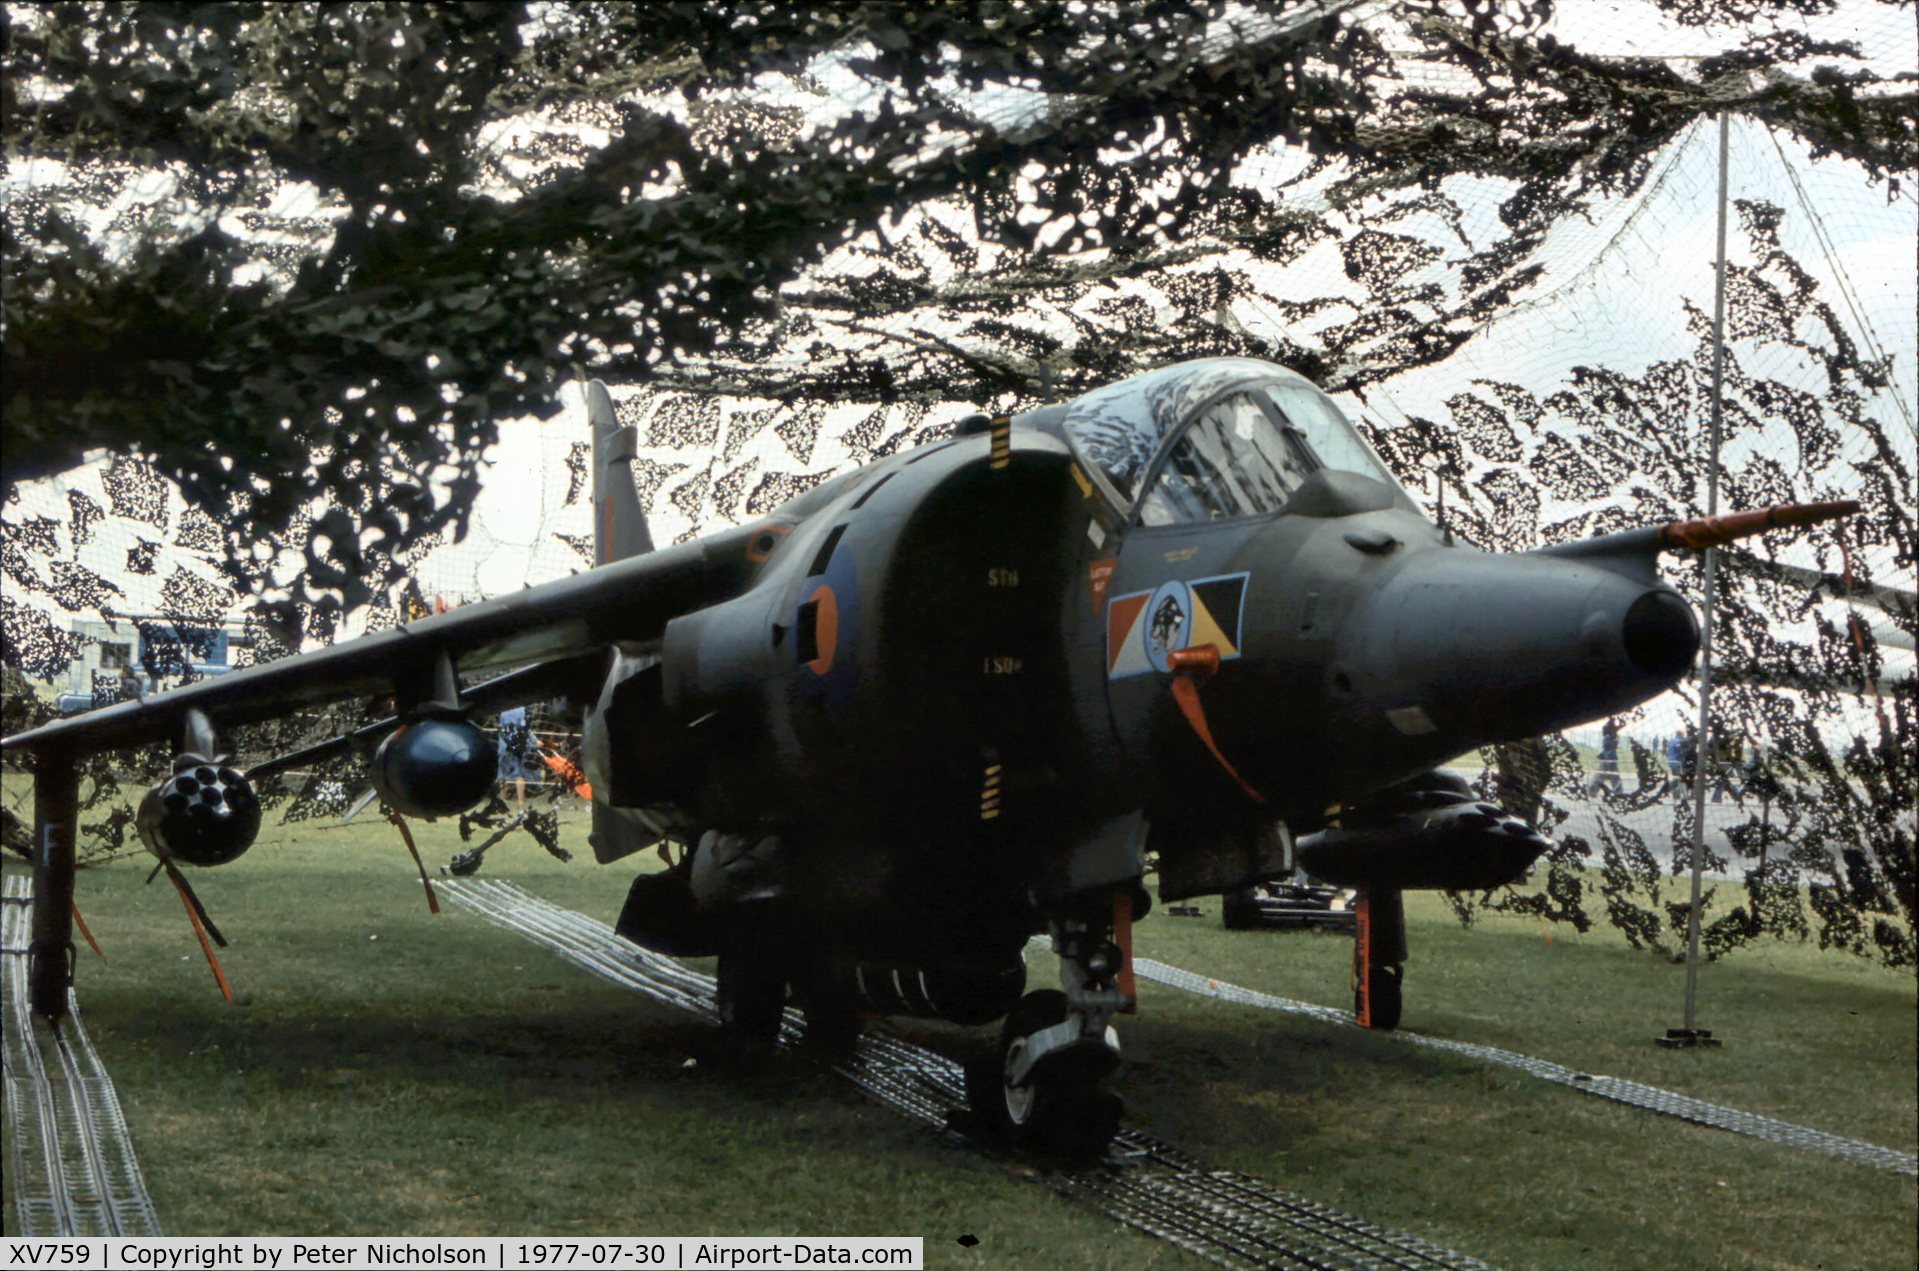 XV759, 1969 Hawker Siddeley Harrier GR.3 C/N 712022, Harrier GR.3 of 233 Operational Conversion Unit on display at the 1977 Royal Review at RAF Finningley.